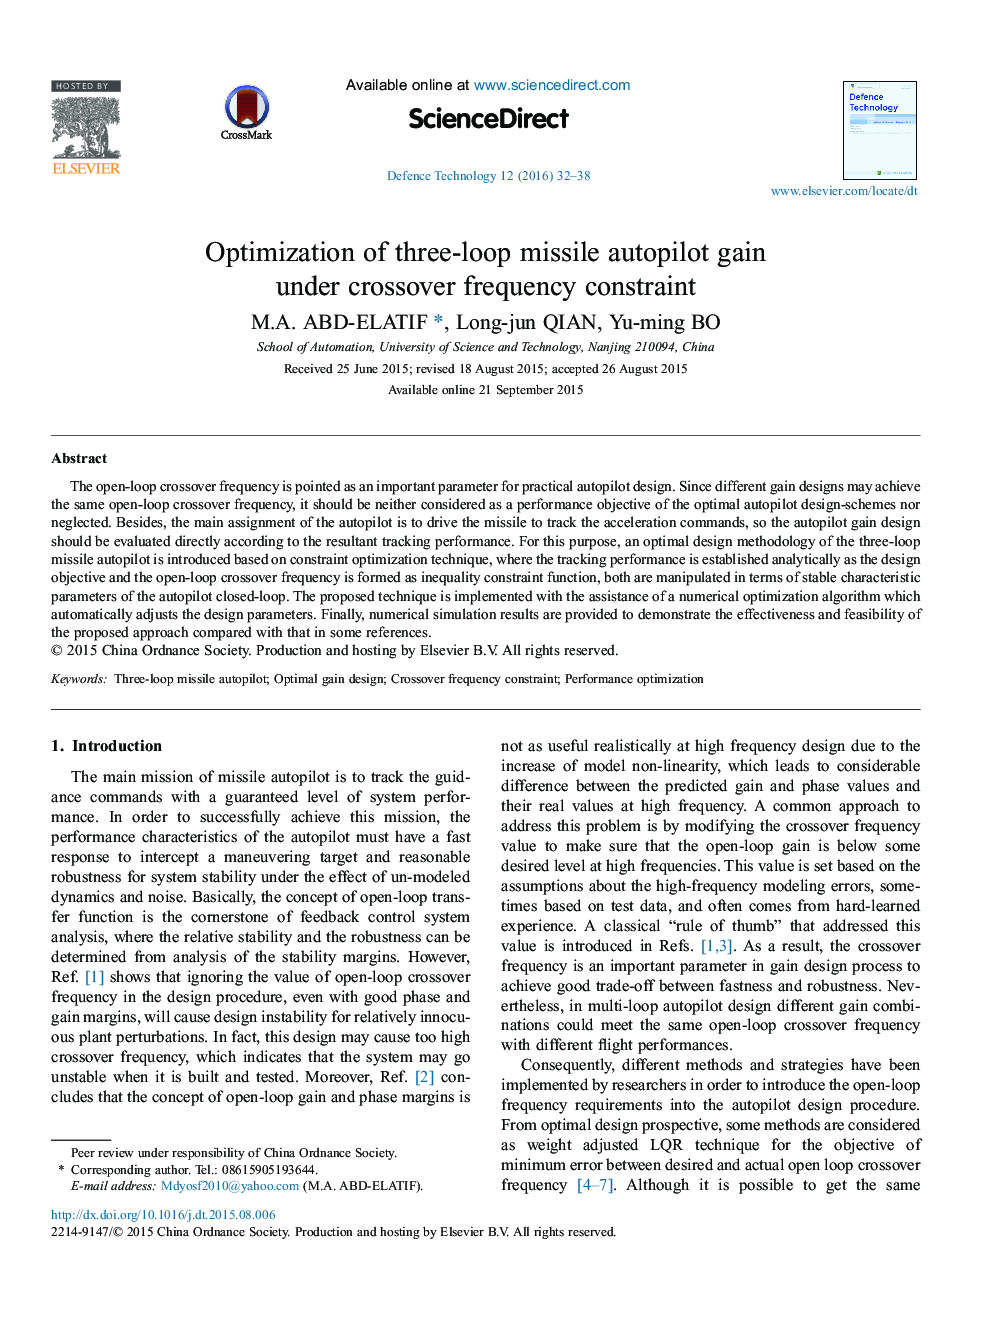 Optimization of three-loop missile autopilot gain under crossover frequency constraint 